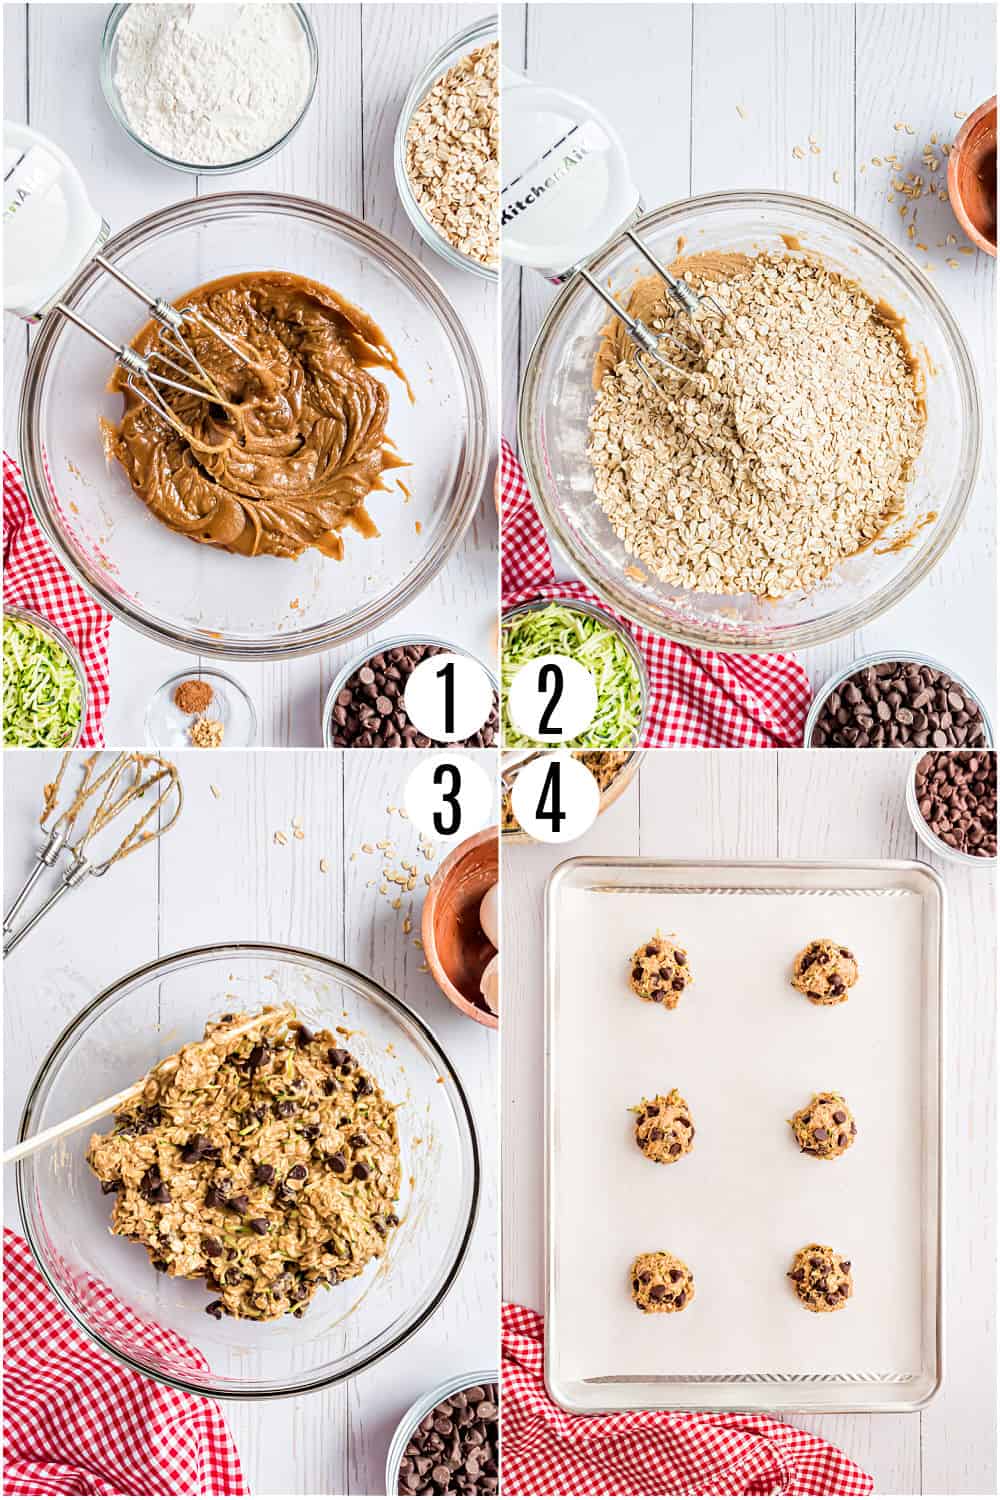 Step by step photos showing how to make zucchini cookies with chocolate chips and oatmeal.